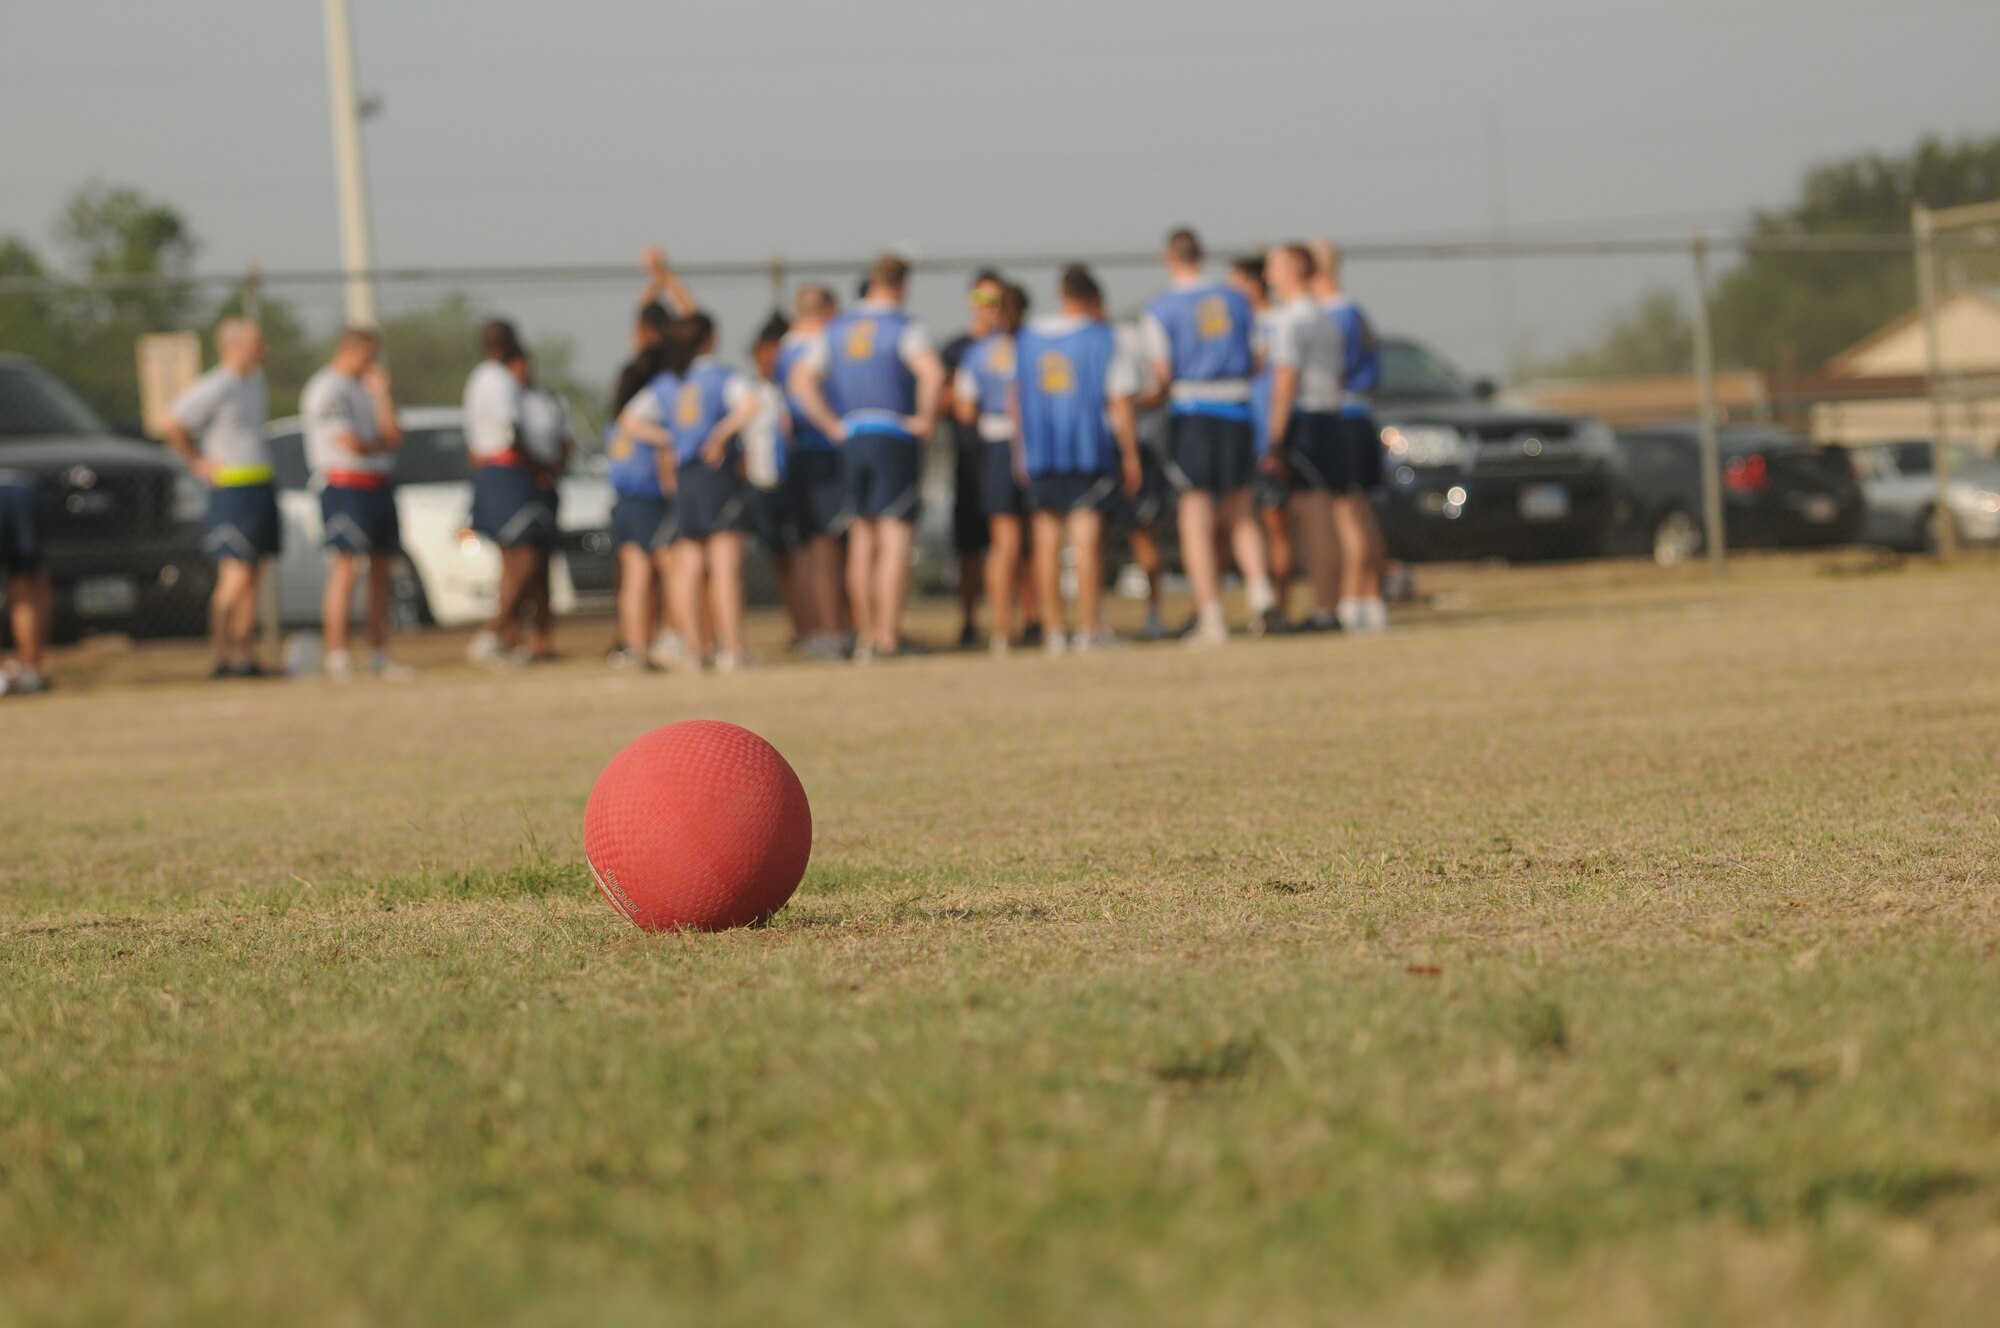 GOODFELLOW AIR FORCE BASE, Texas - Team Goodfellow devoted May 27 to safety and sports to kick off the 101 critical days of summer. (U.S. Air Force photo/Staff Sgt. Heather L Rodgers) 